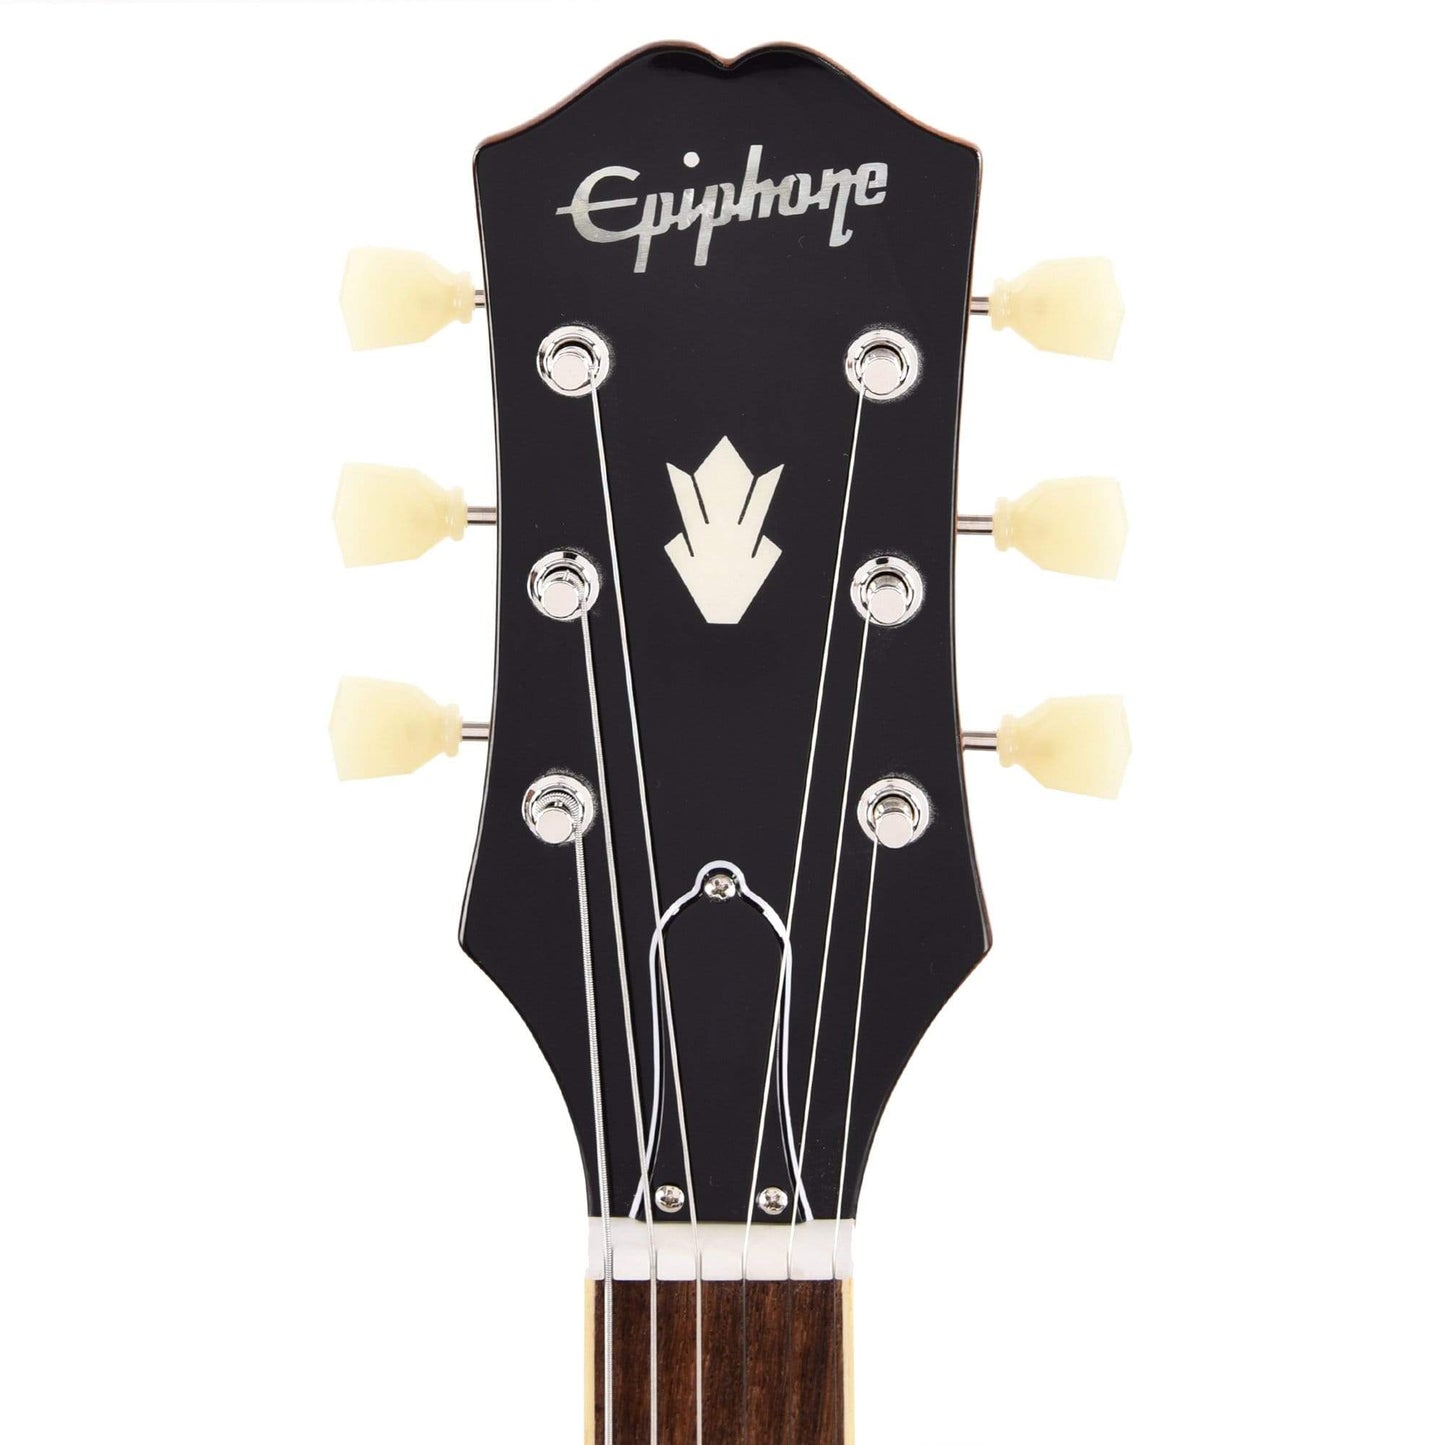 Epiphone Inspired by Gibson ES-335 Vintage Sunburst Electric Guitars / Semi-Hollow